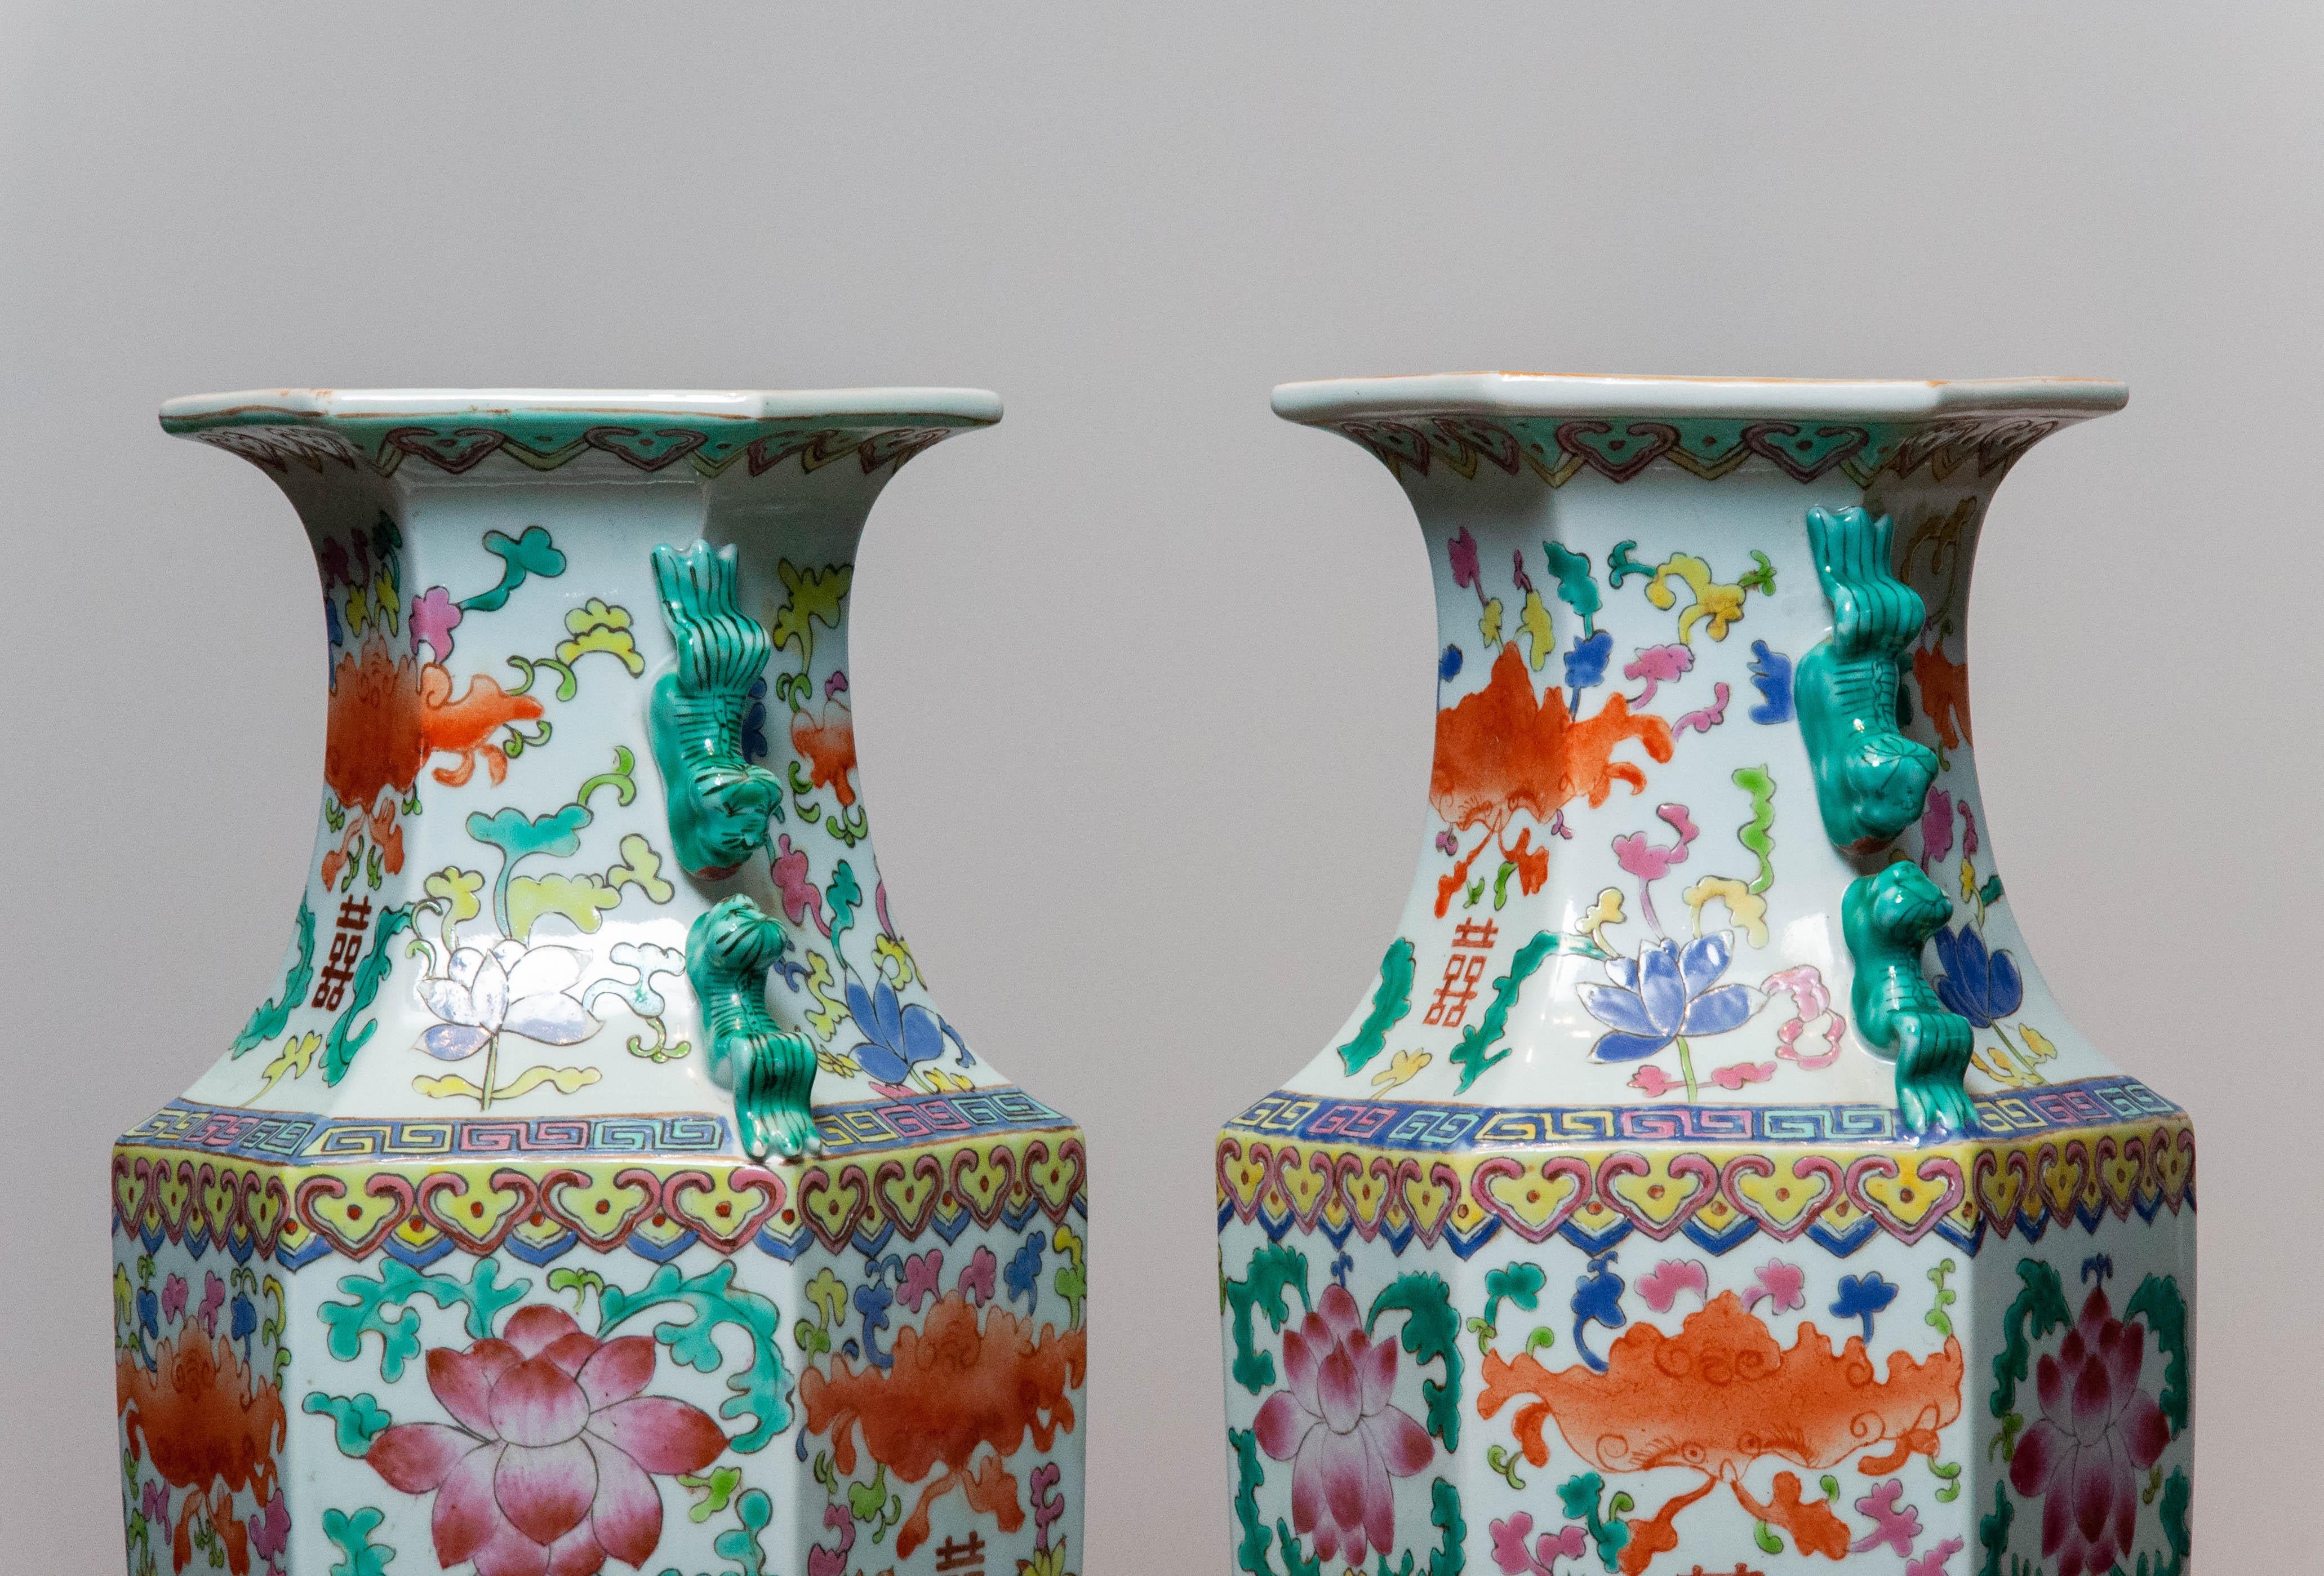 Late 19th Century Qing Dynasty Matching Pair Chinese Famille Rose Vases In Good Condition For Sale In Silvolde, Gelderland